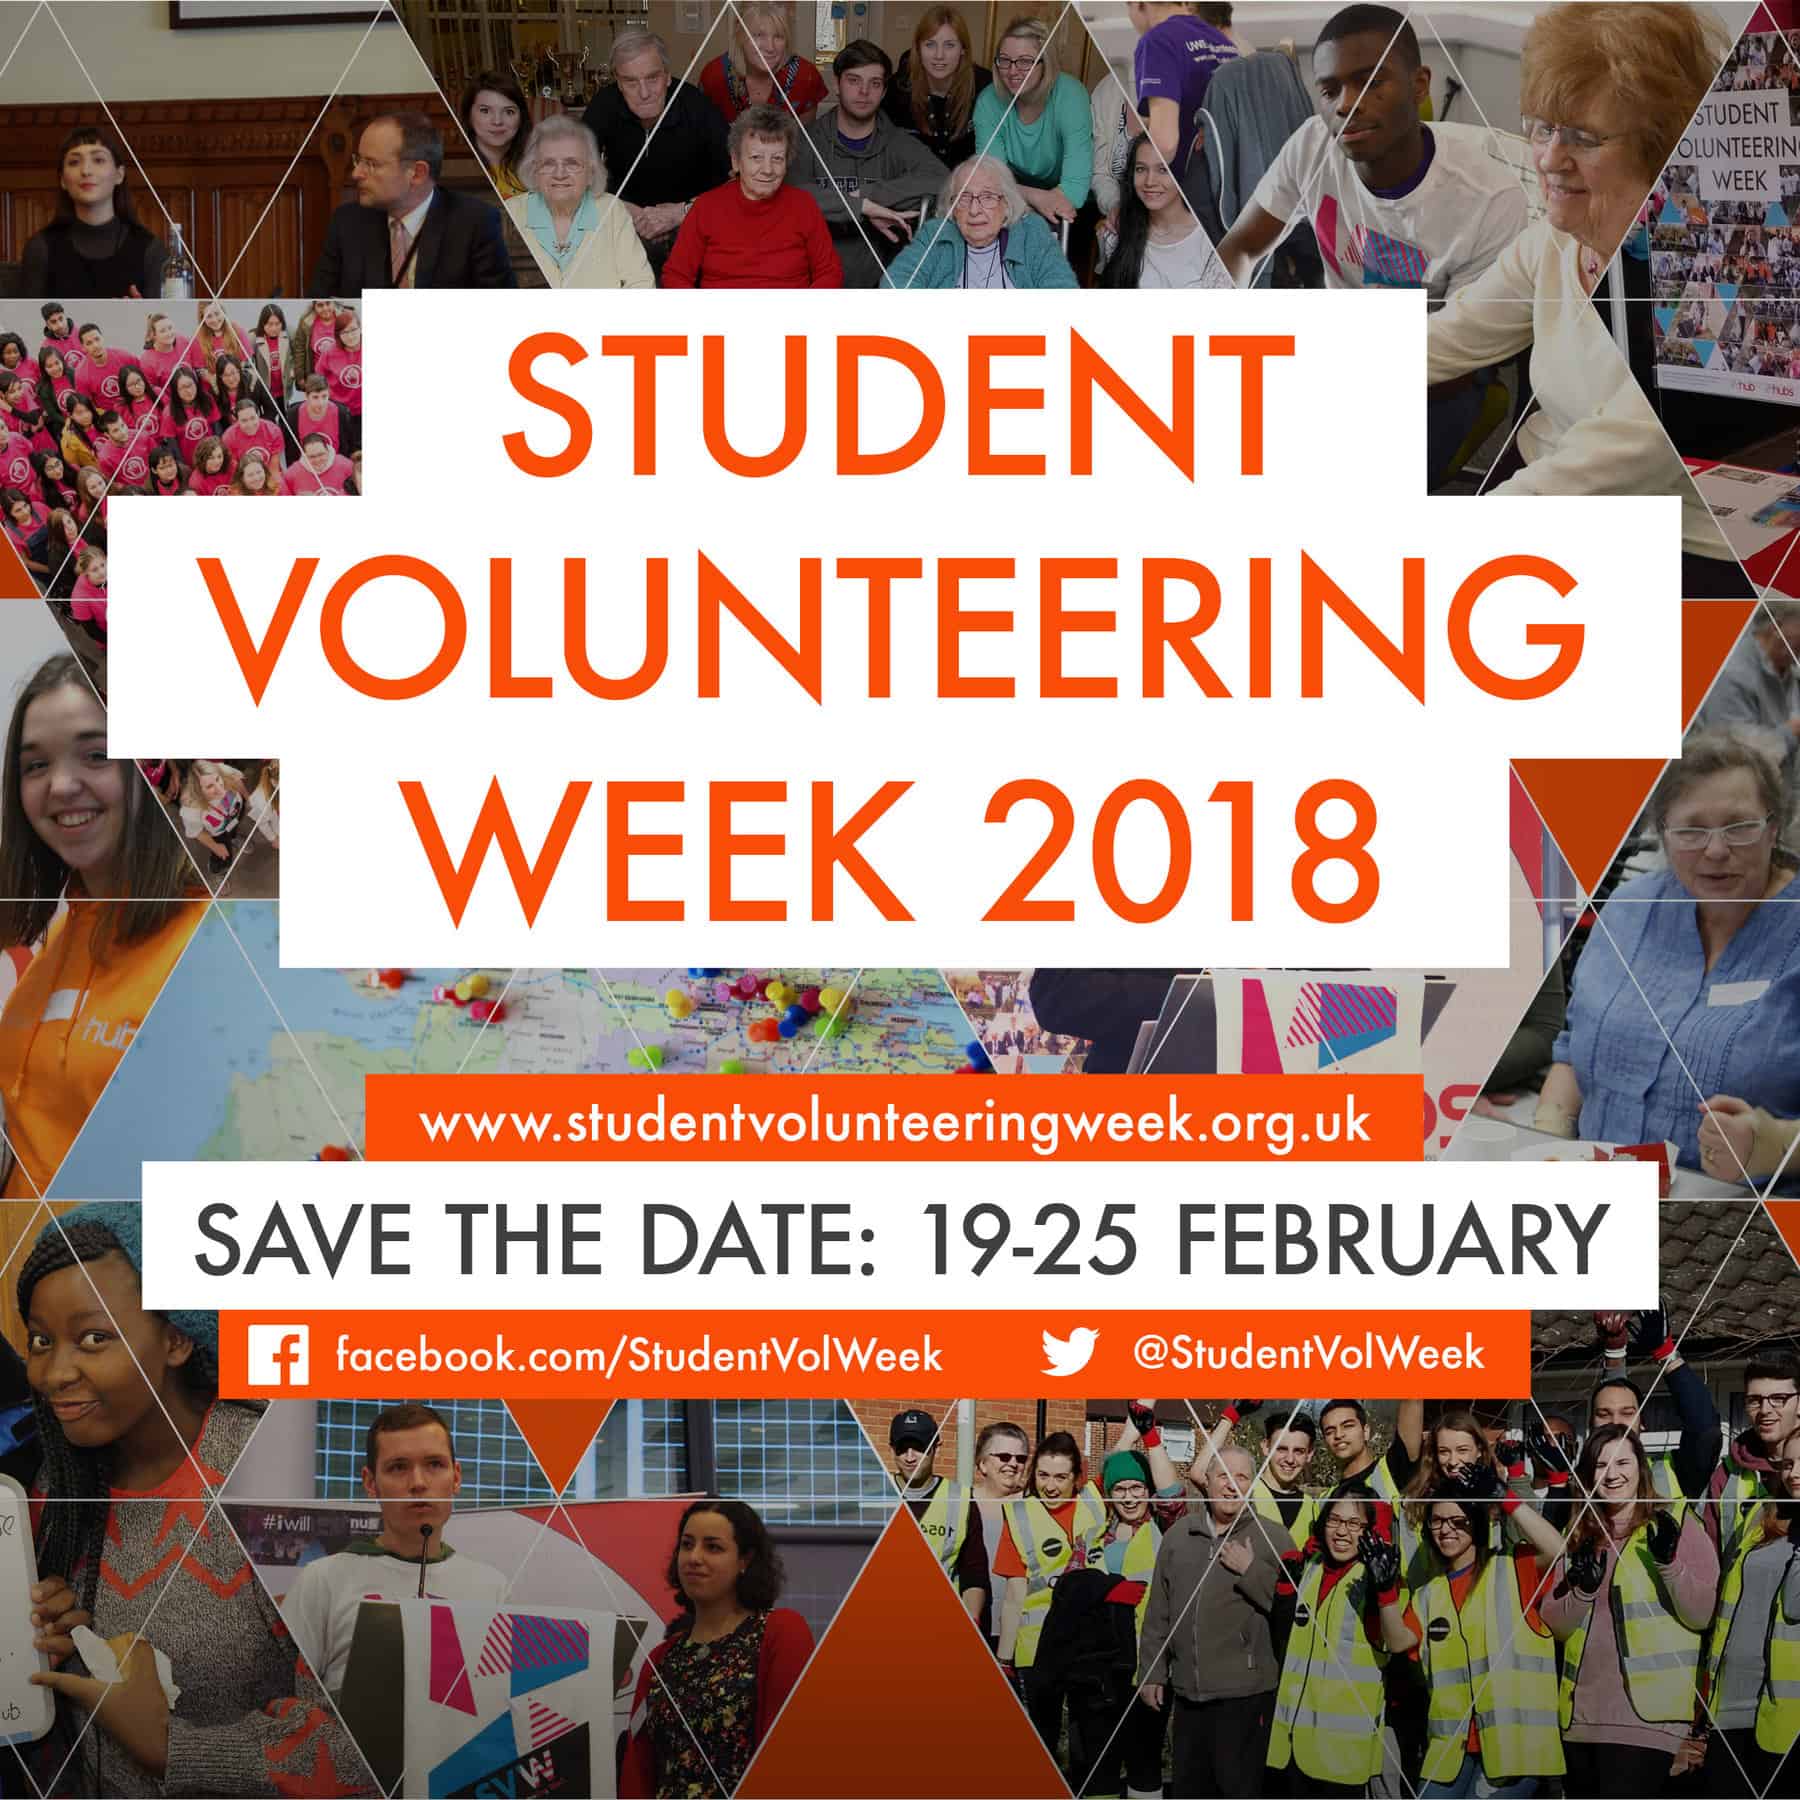 Graphic announcing that Student Volunteering Week 2018 will take place from 19th - 25th February.